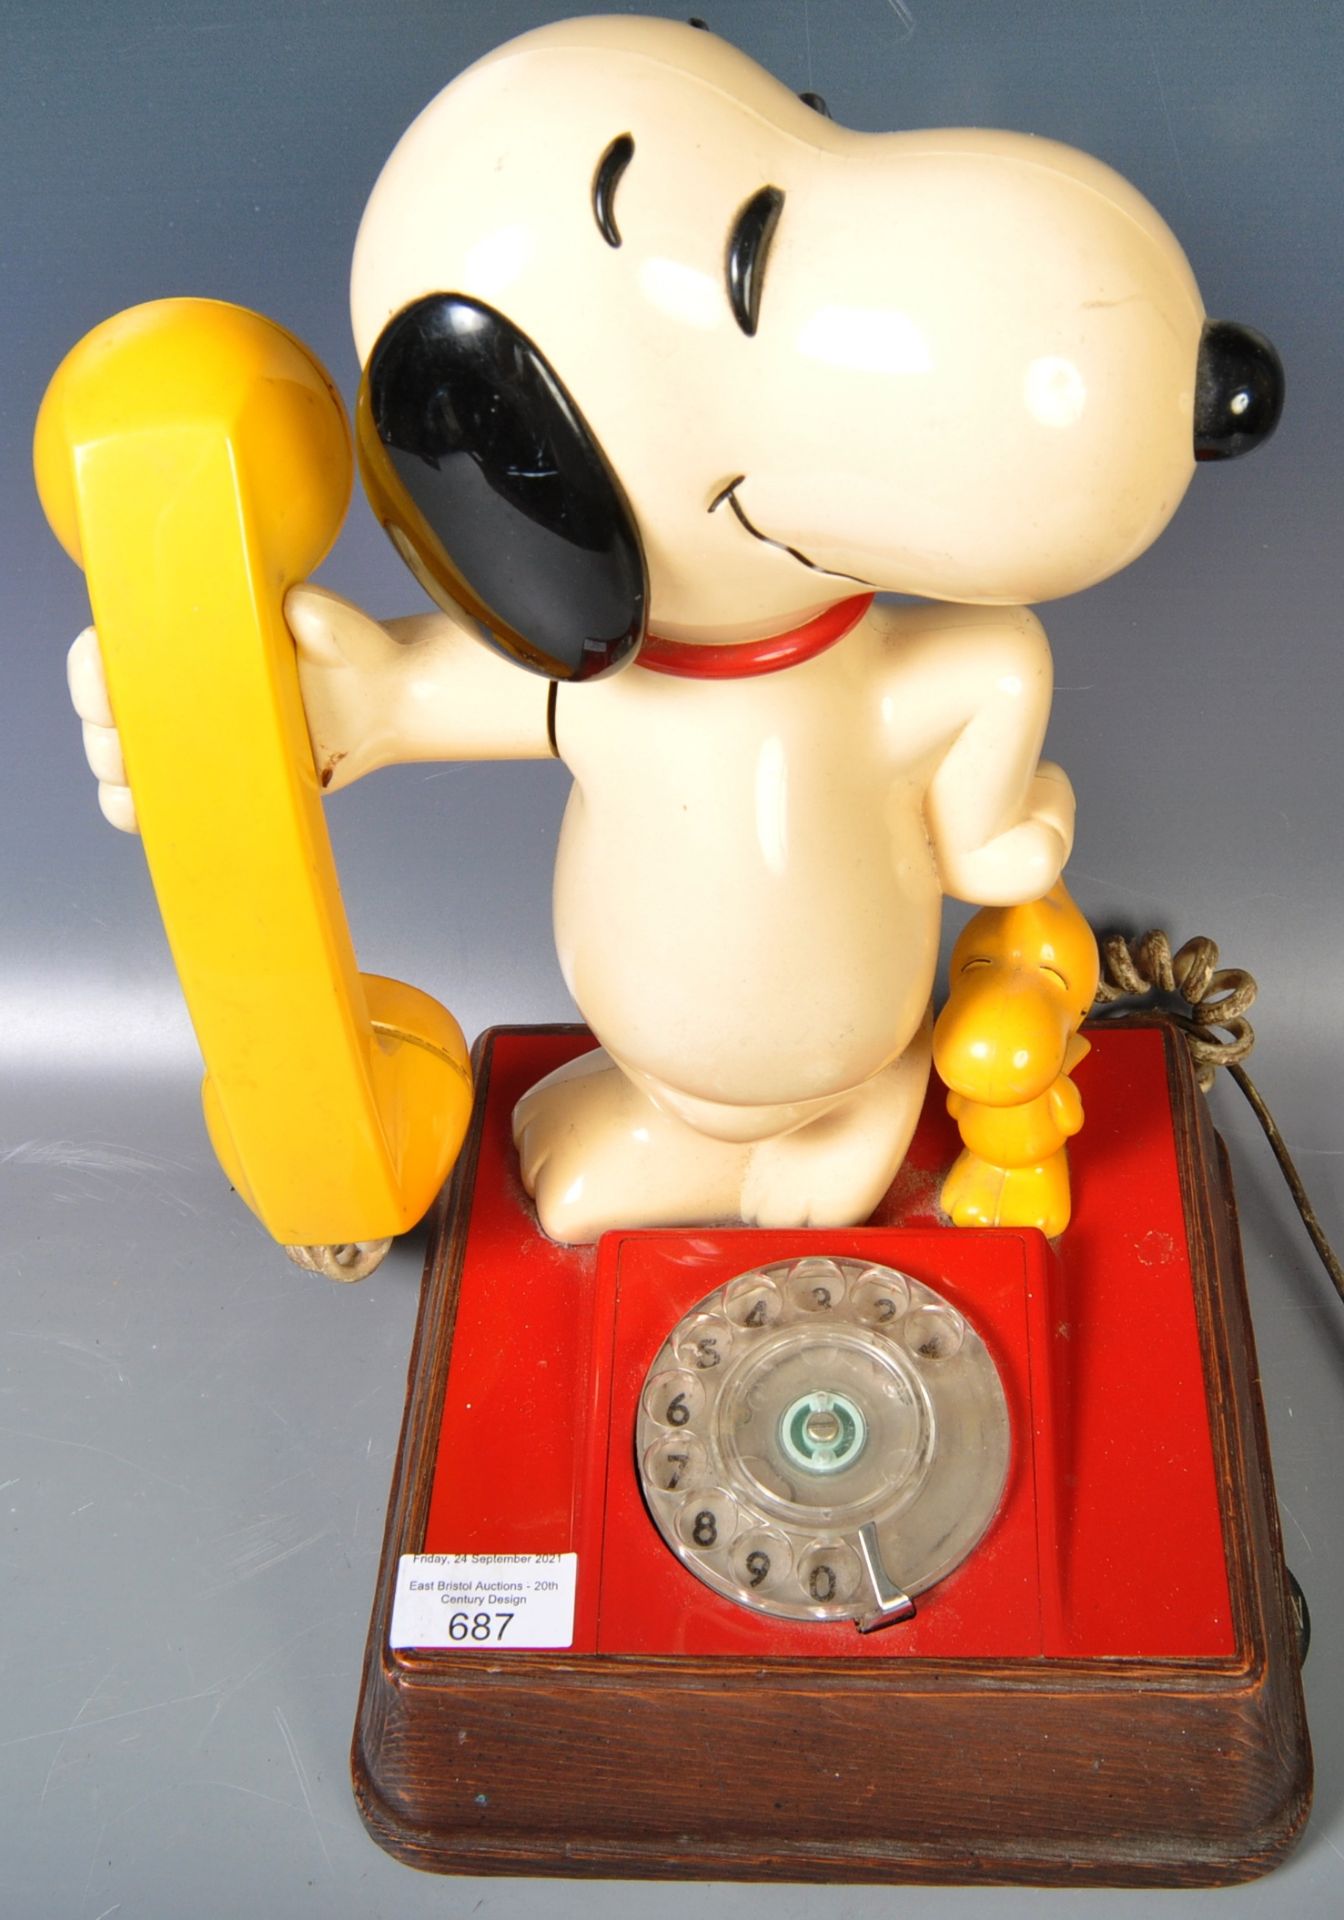 RETRO 1970'S NOVELTY SNOOPY DIAL TELEPHONE - Image 2 of 7